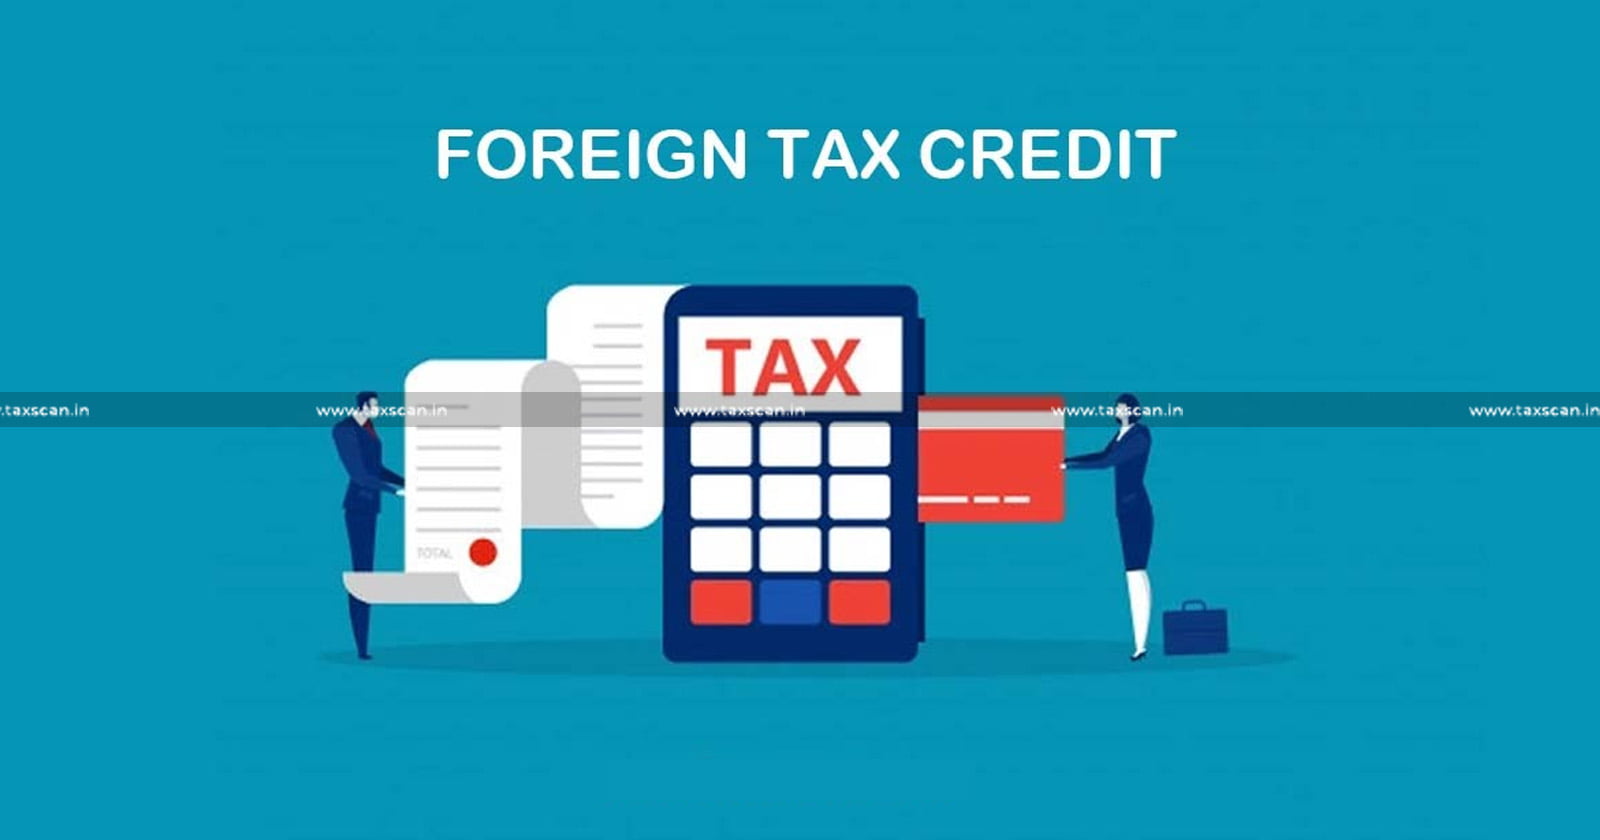 Return - of - Income - and - Statement - in - Form - 67 - Filed - ITAT - Foreign - Tax - Credit - TAXSCAN